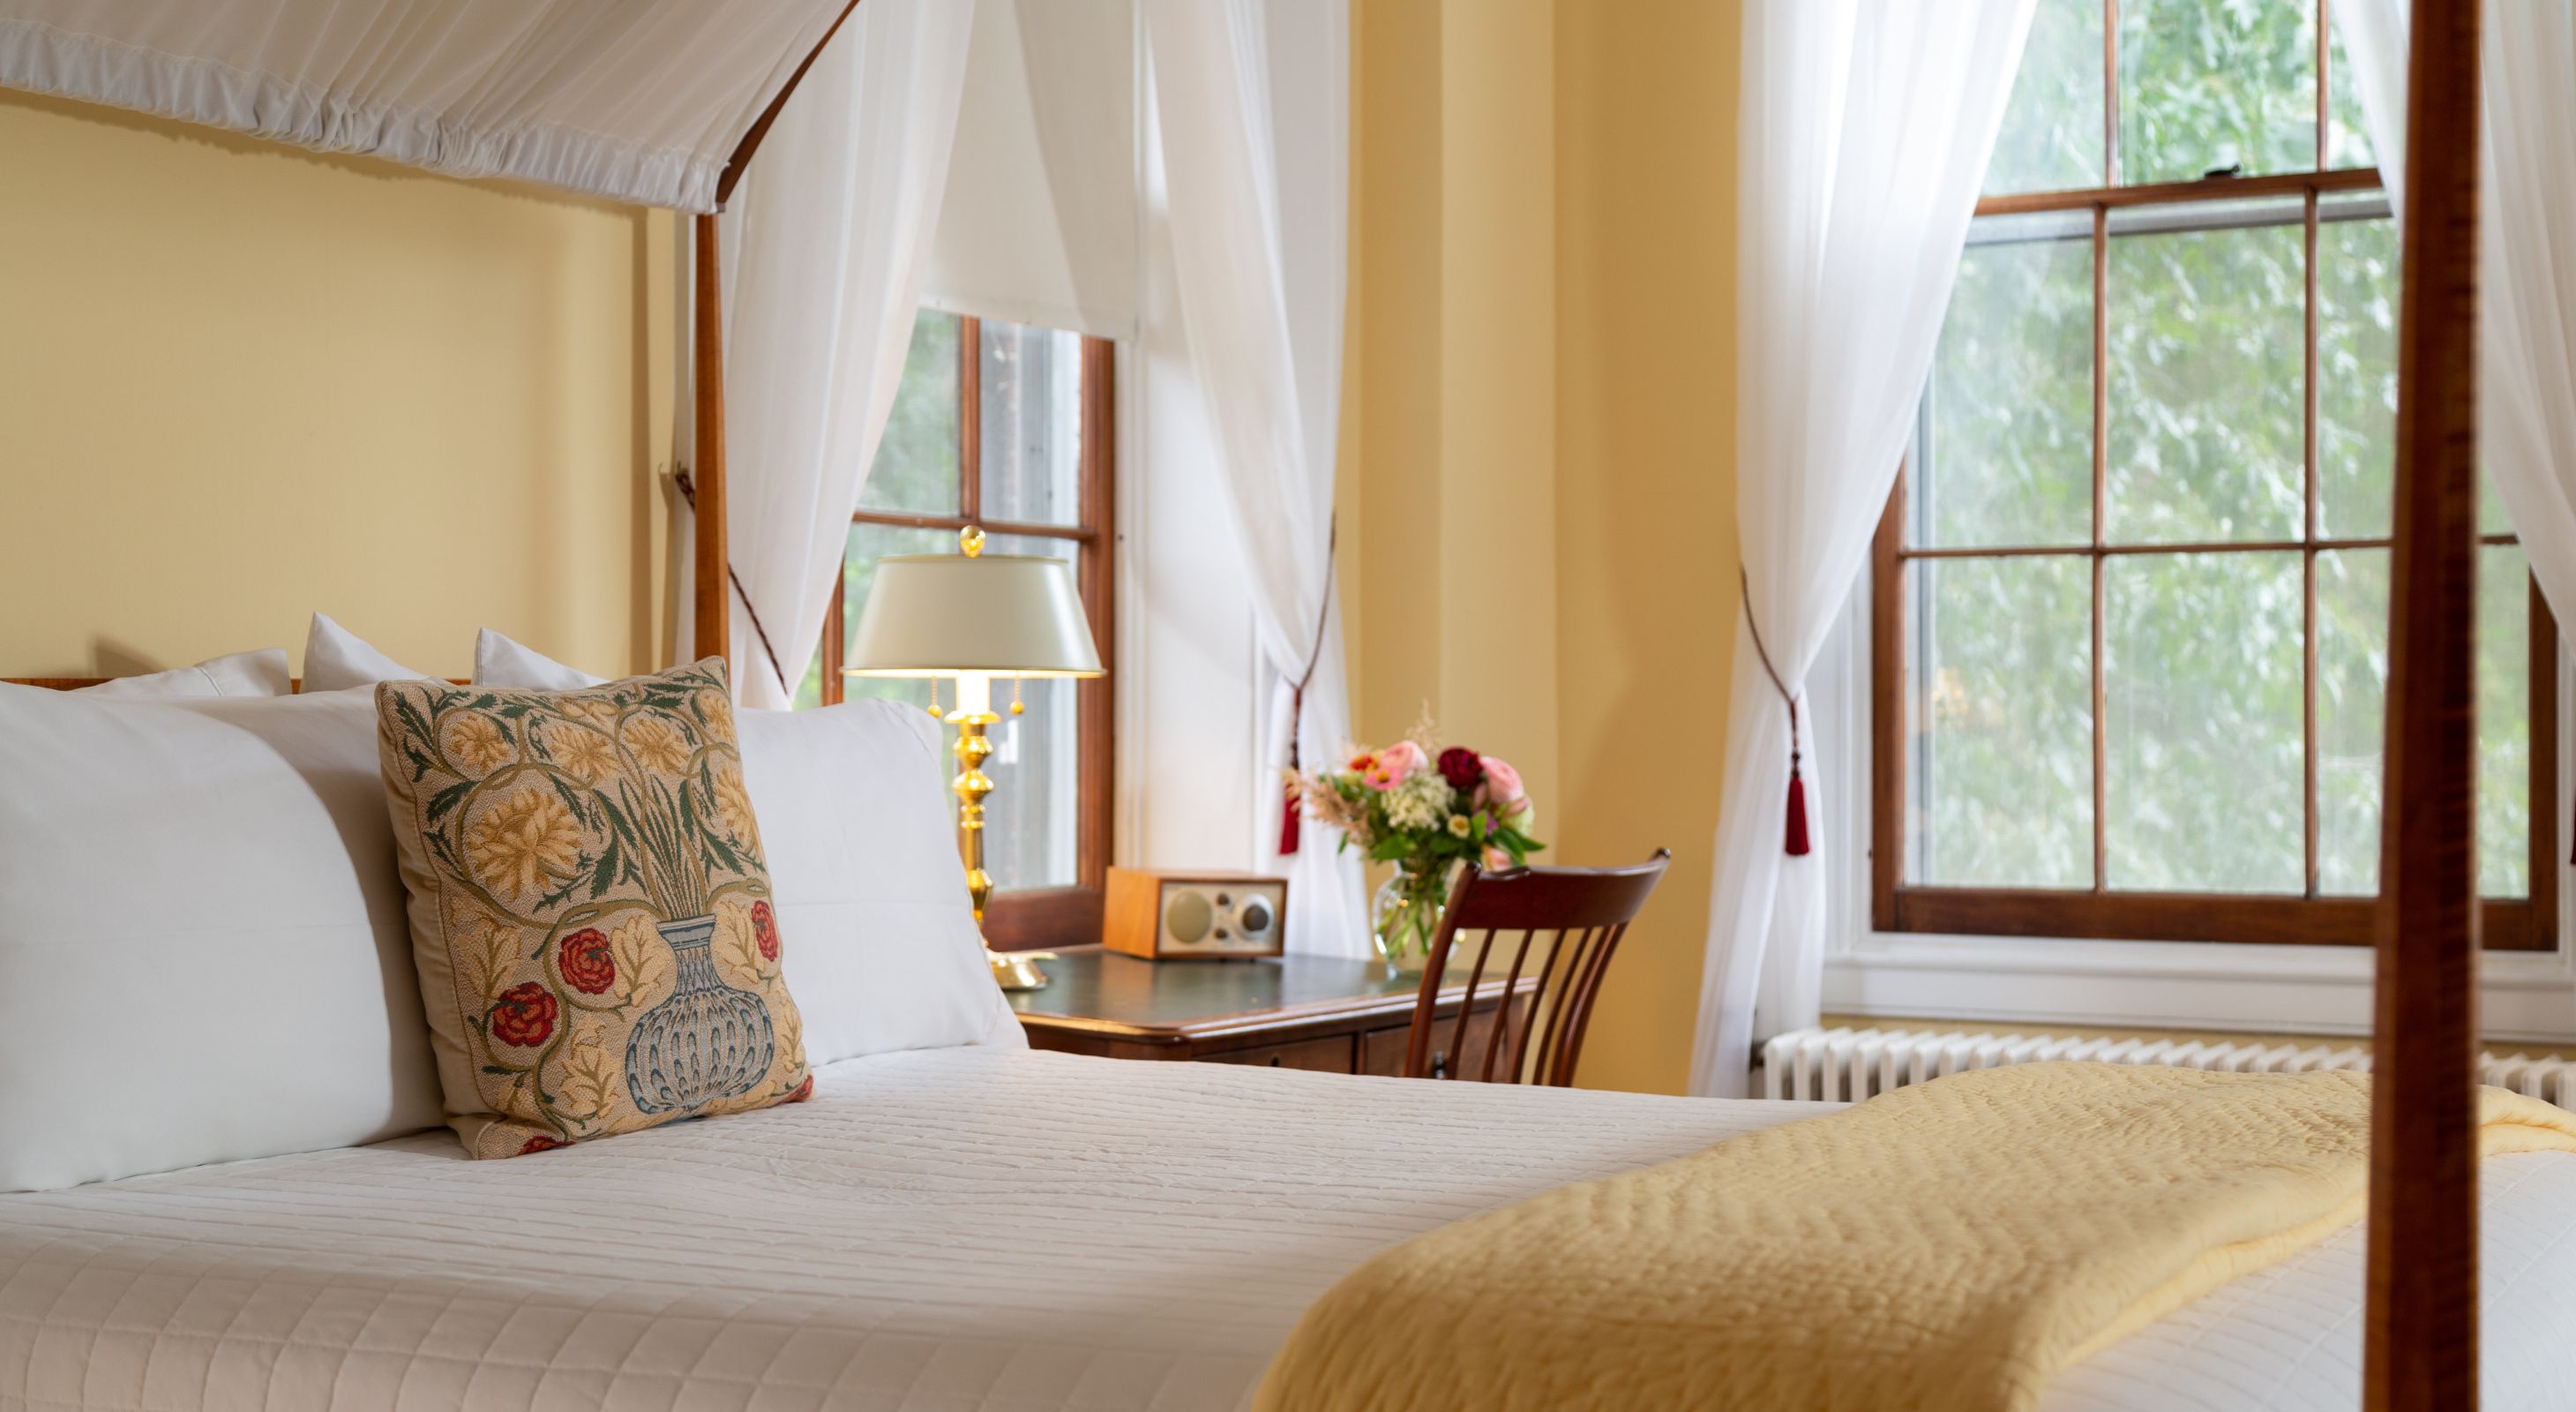 Close-up of canopy bed with white bedding and canopy, buttery yellow walls, and a desk near two windows with white shears